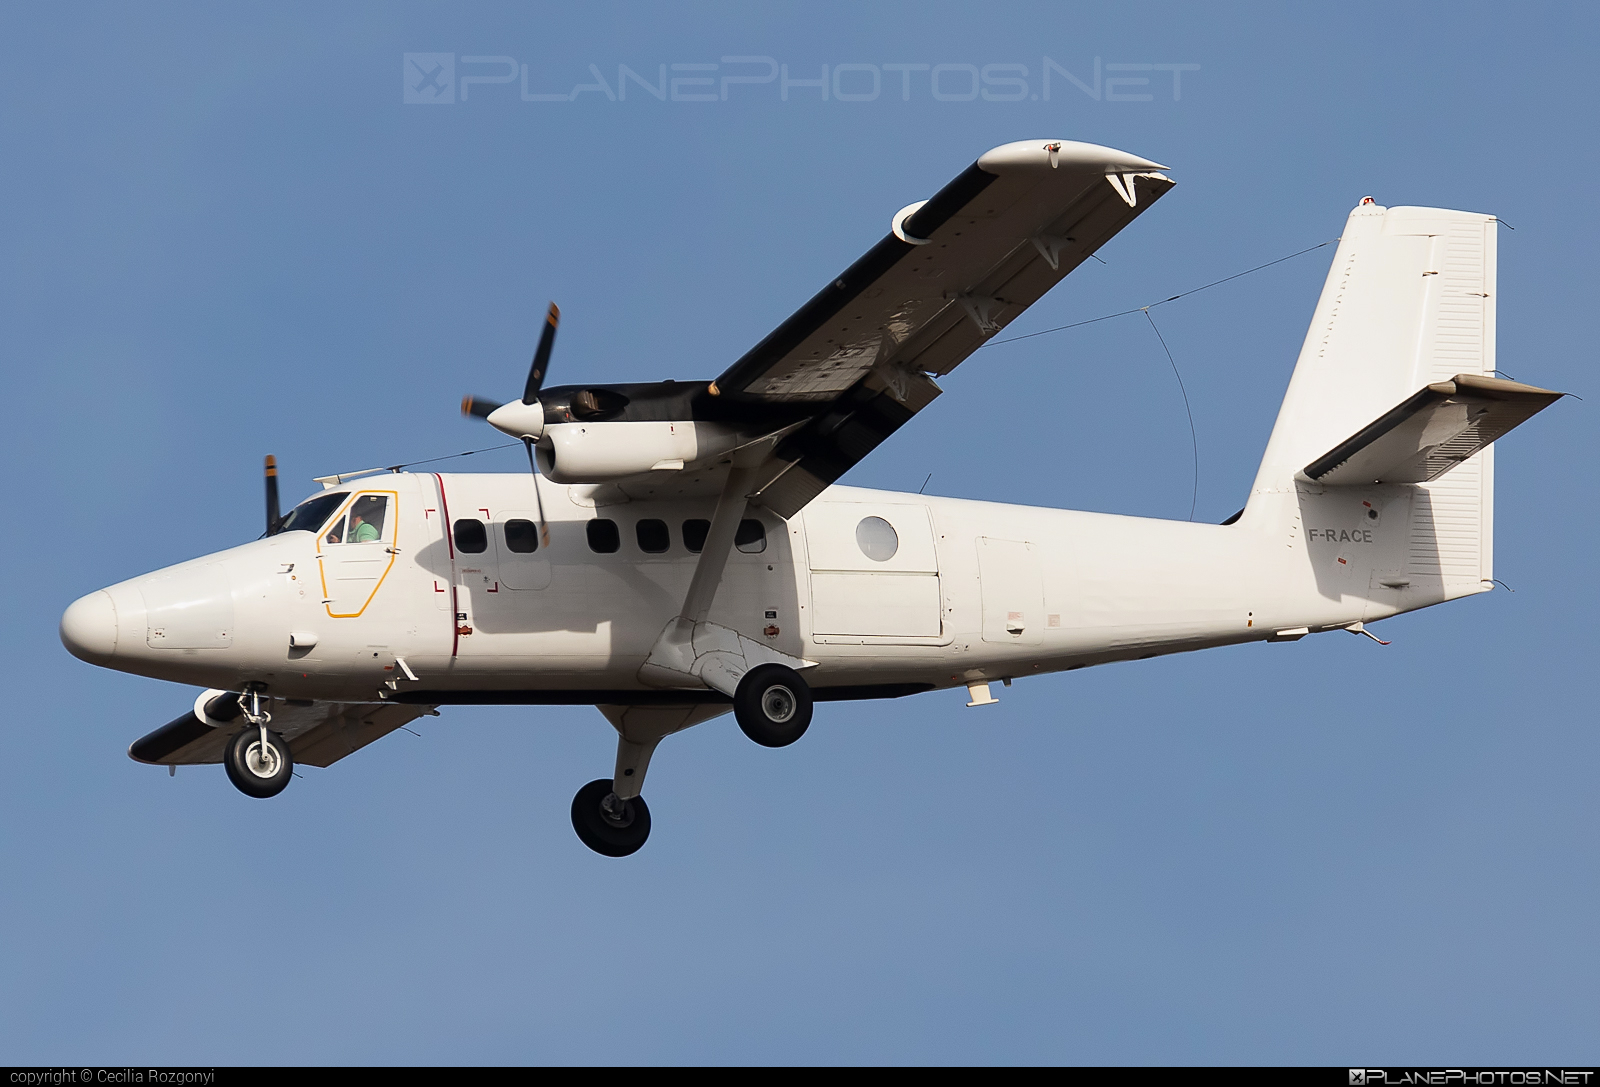 De Havilland Canada DHC-6-300 Twin Otter - F-RACE operated by Armée de l´Air (French Air Force) #armeedelair #dehavillandcanada #dhc6 #dhc6300 #dhc6300twinotter #dhc6twinotter #frenchairforce #twinotter